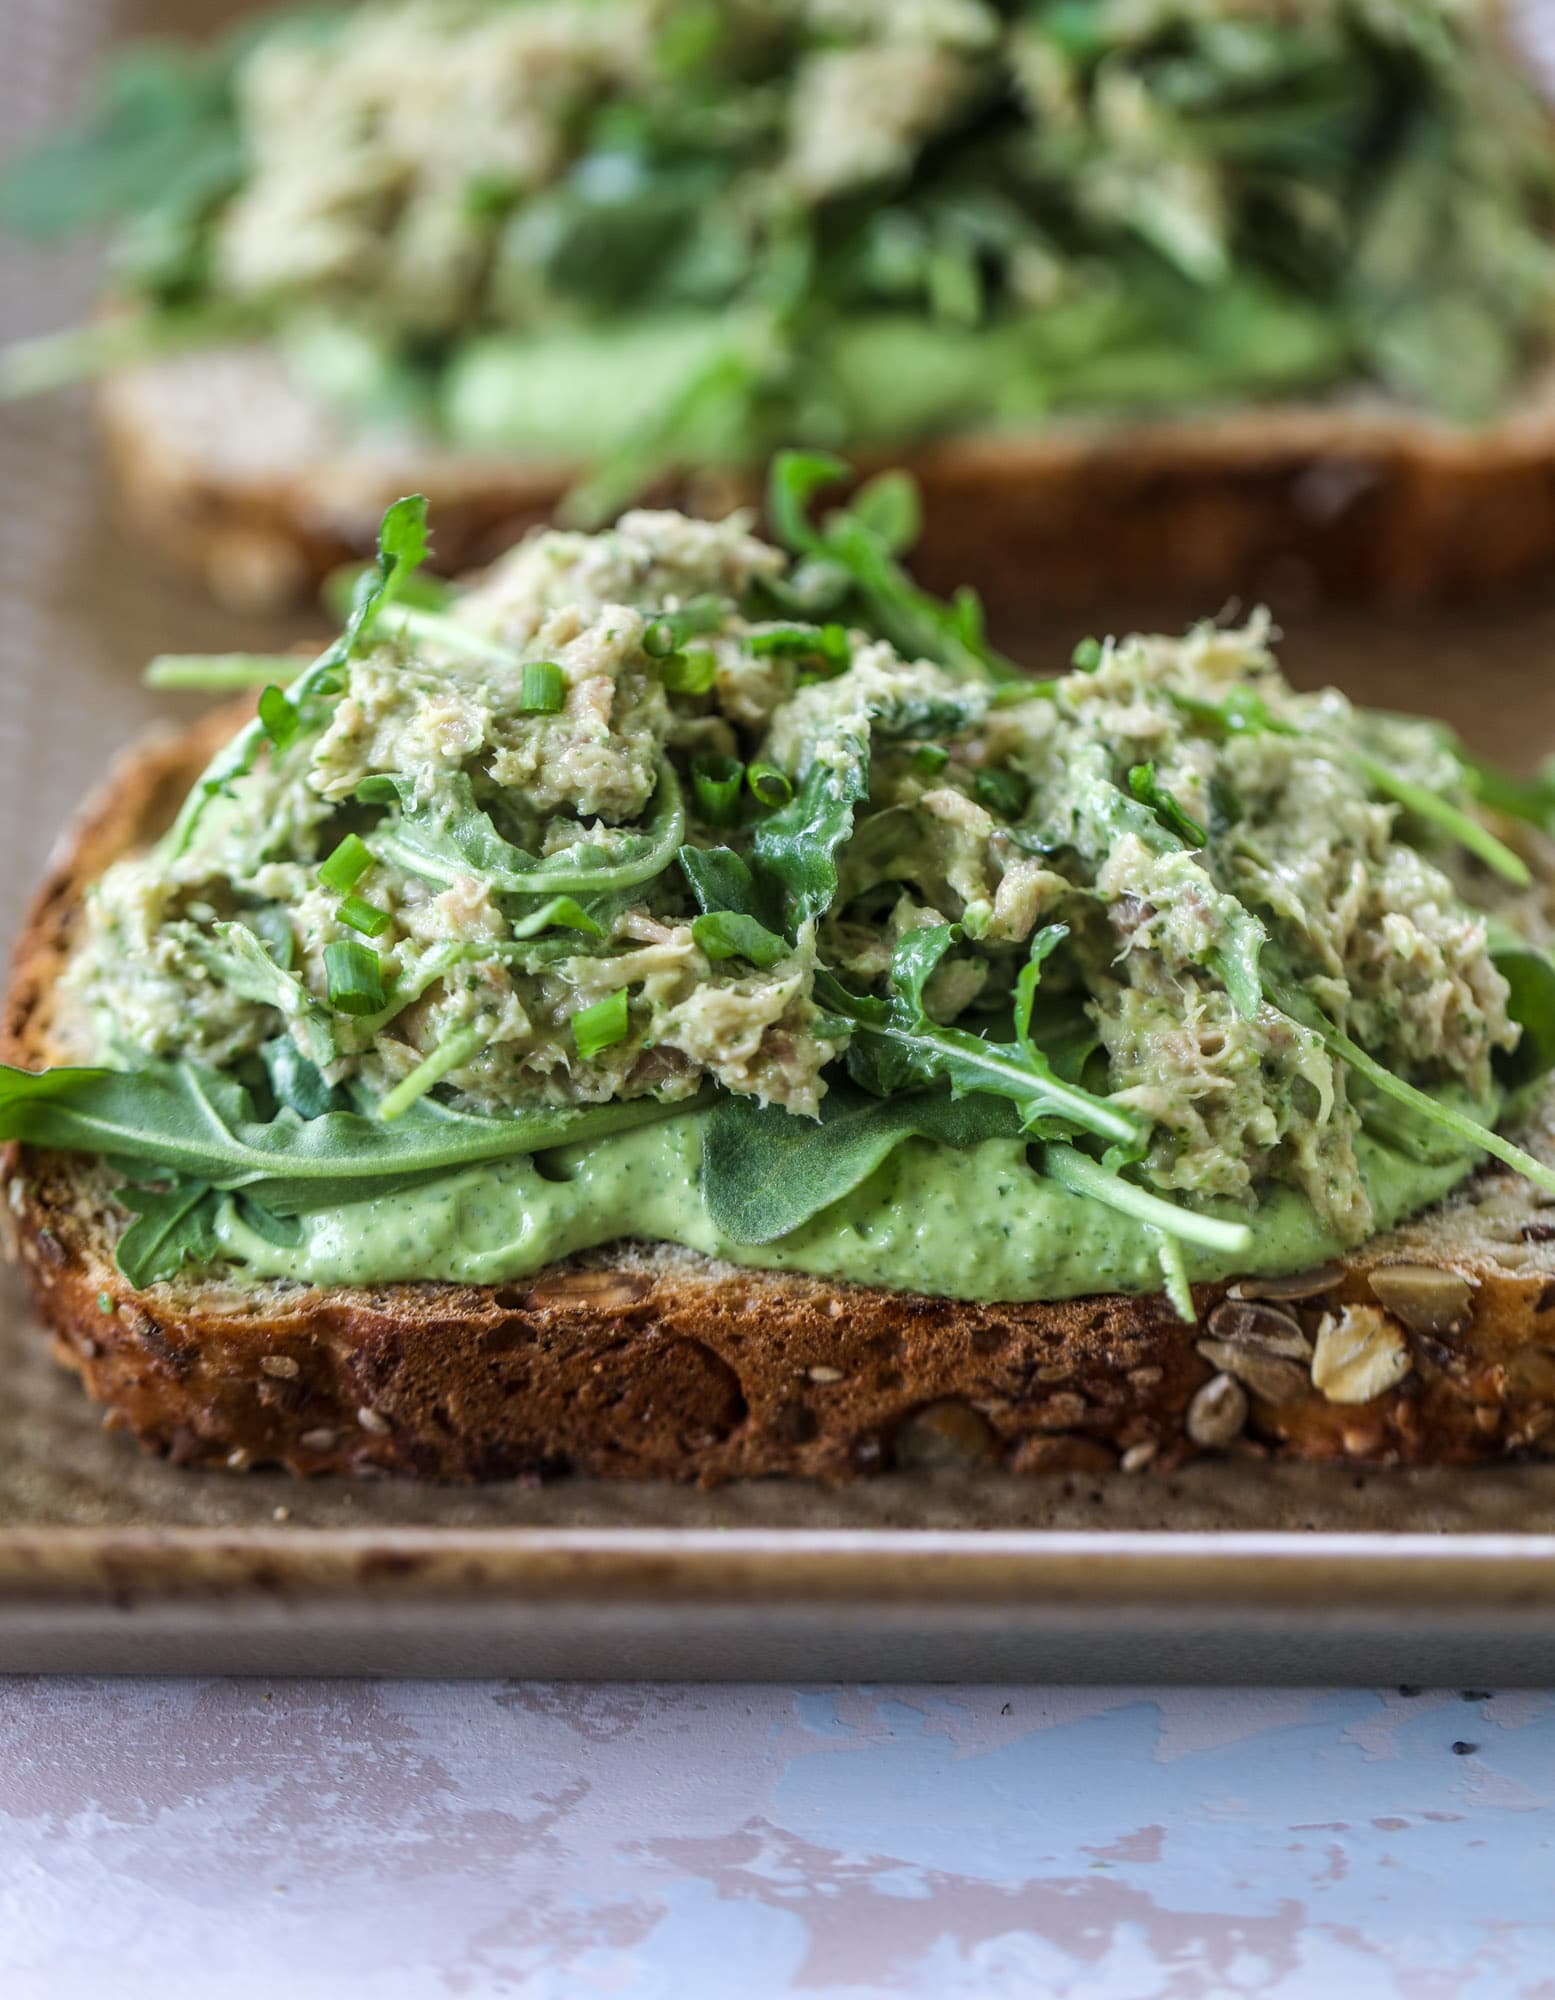 These green green tuna melt tartines are a lunch dream come true! The green goddess dressing is full of avocado, greek yogurt, spinach and fresh herbs. Paired with the tuna, whole grain toast and melty cheese, it's incredibly delicious and a super easy lunch! I howsweeteats.com #green #goddess #tune #salad #melts